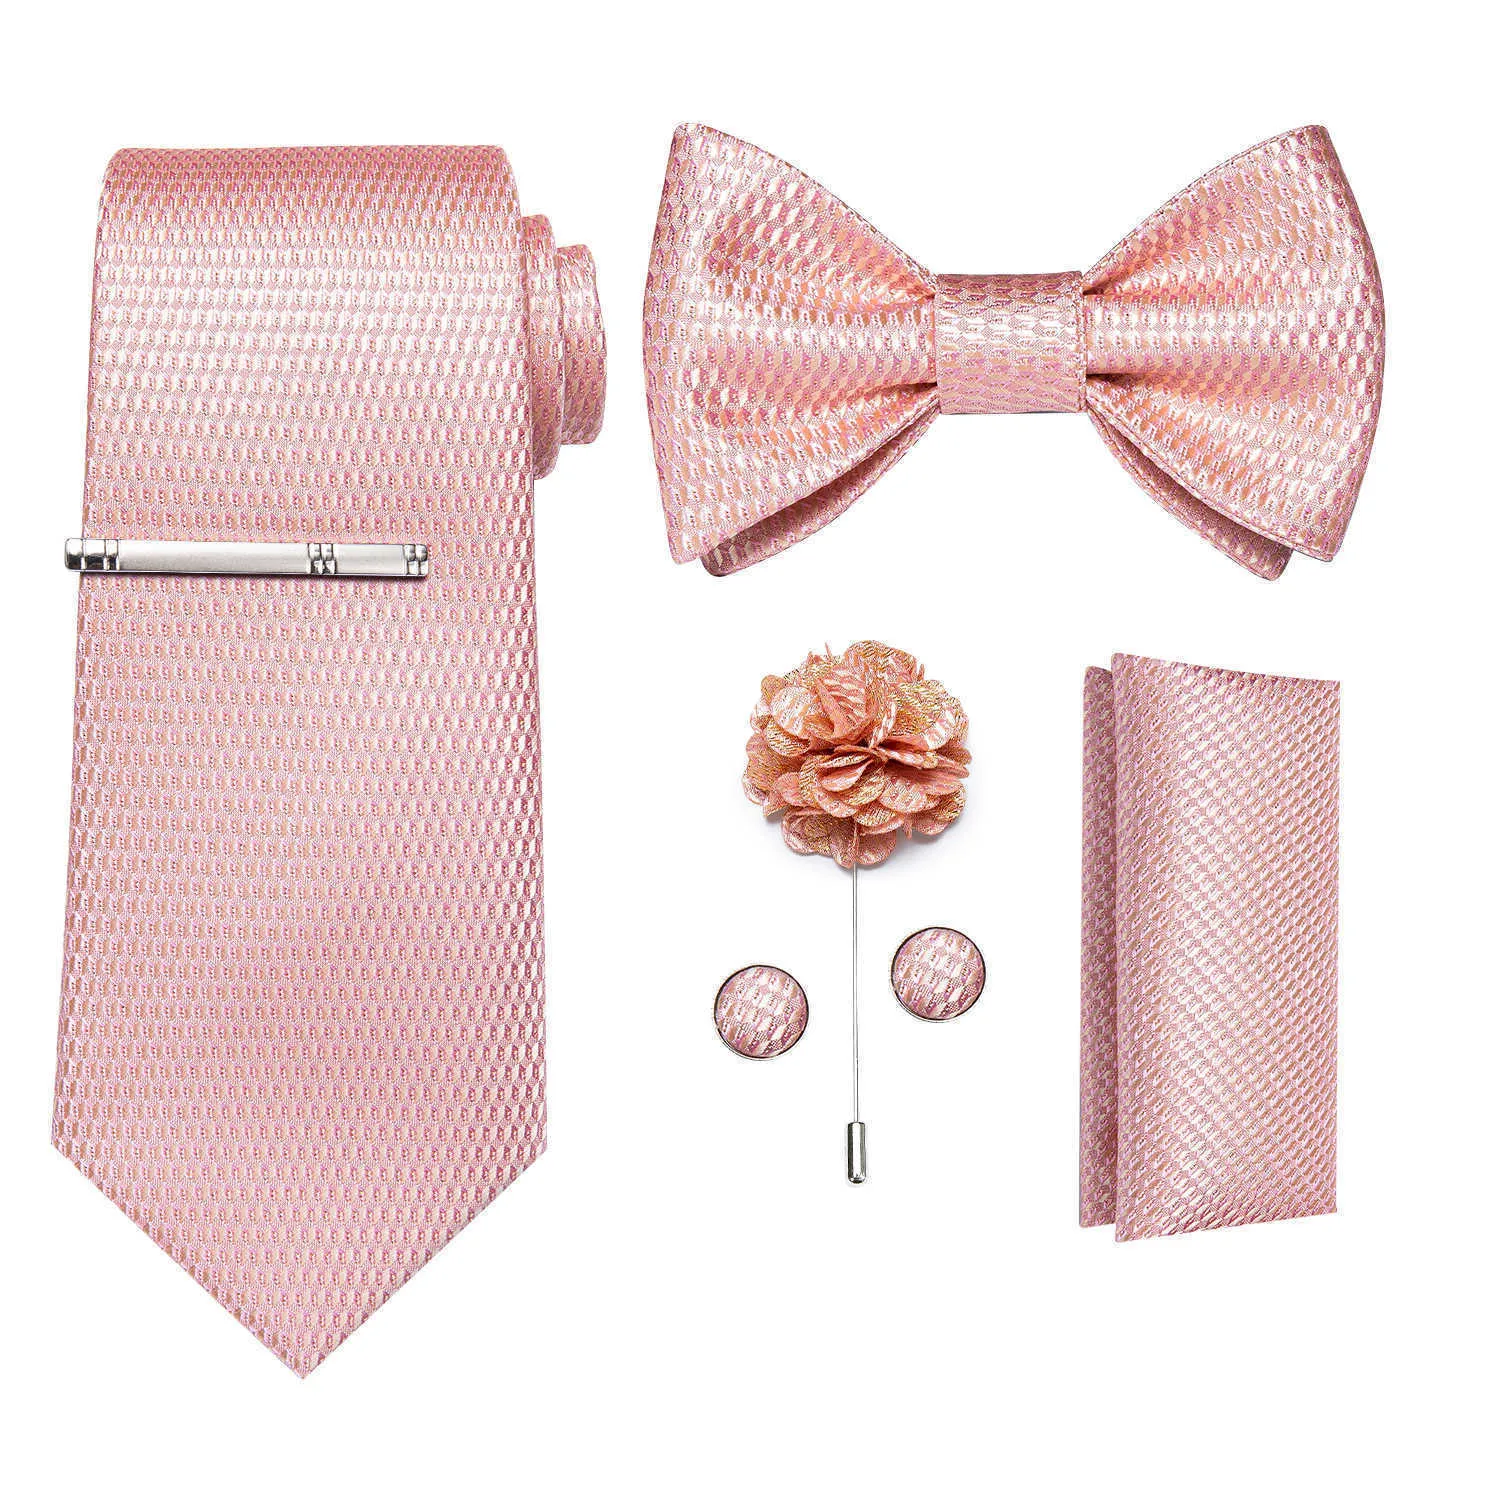 Bow Ties Solid Pink Plaid Ties For Men Fashion Men's Self Tie Bow Tie Pocket Square Cufflinks Set Men Neck Tie Clip And Brooch L221022